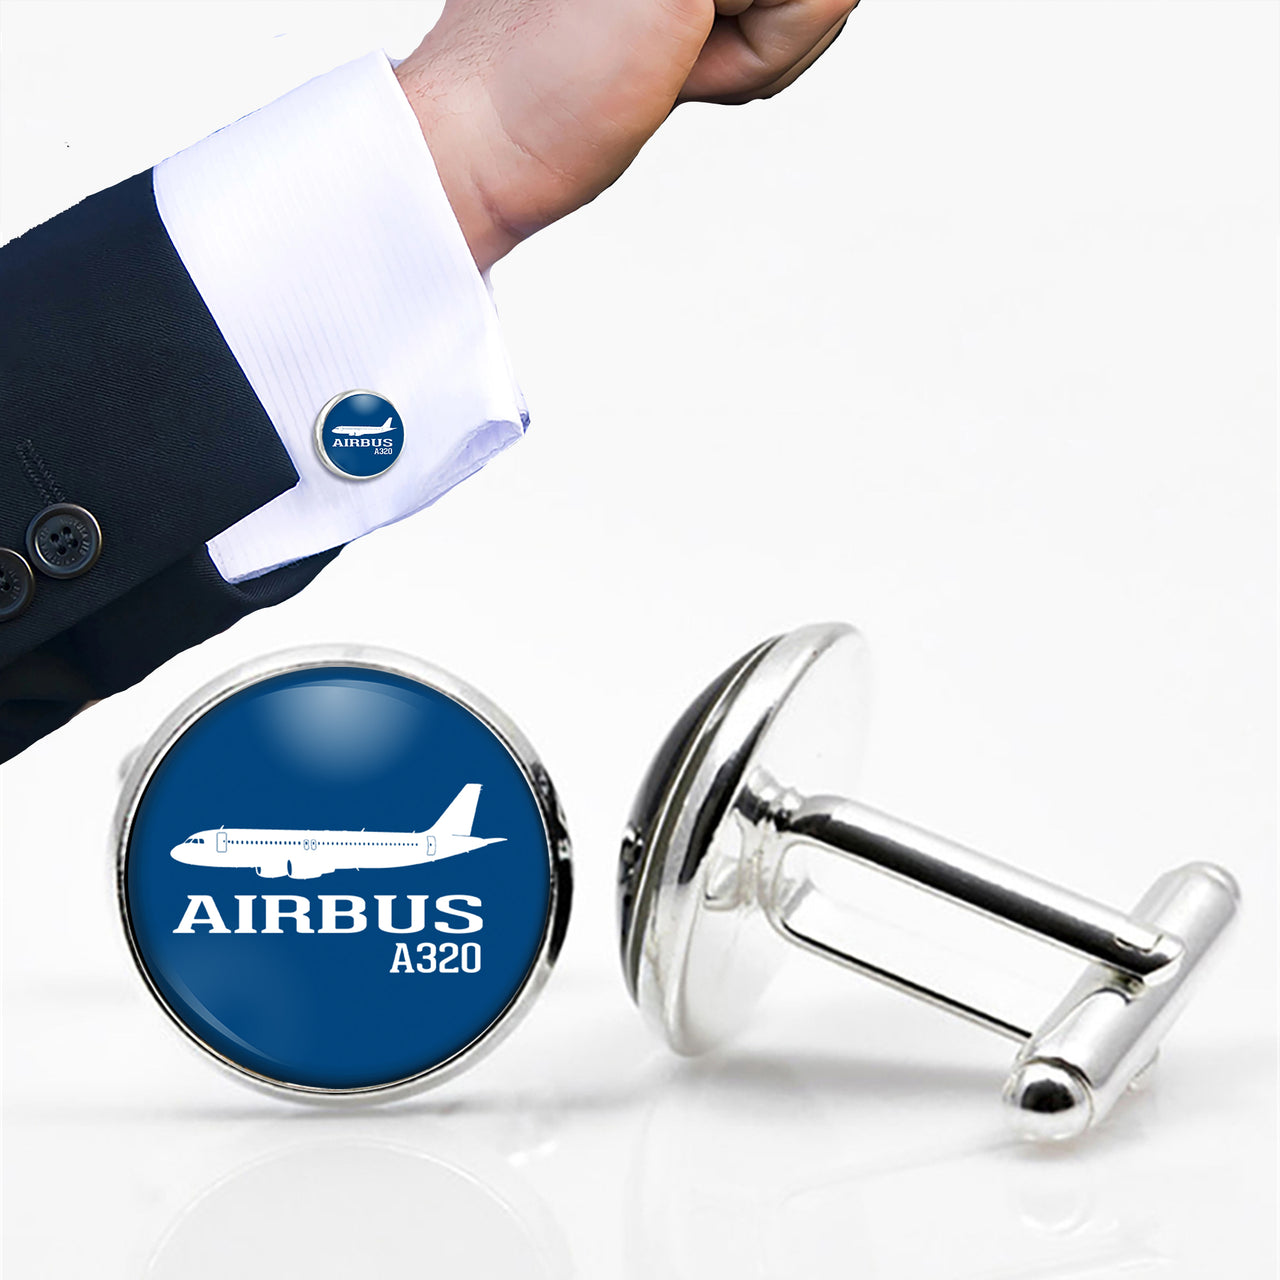 Airbus A320 Printed Designed Cuff Links